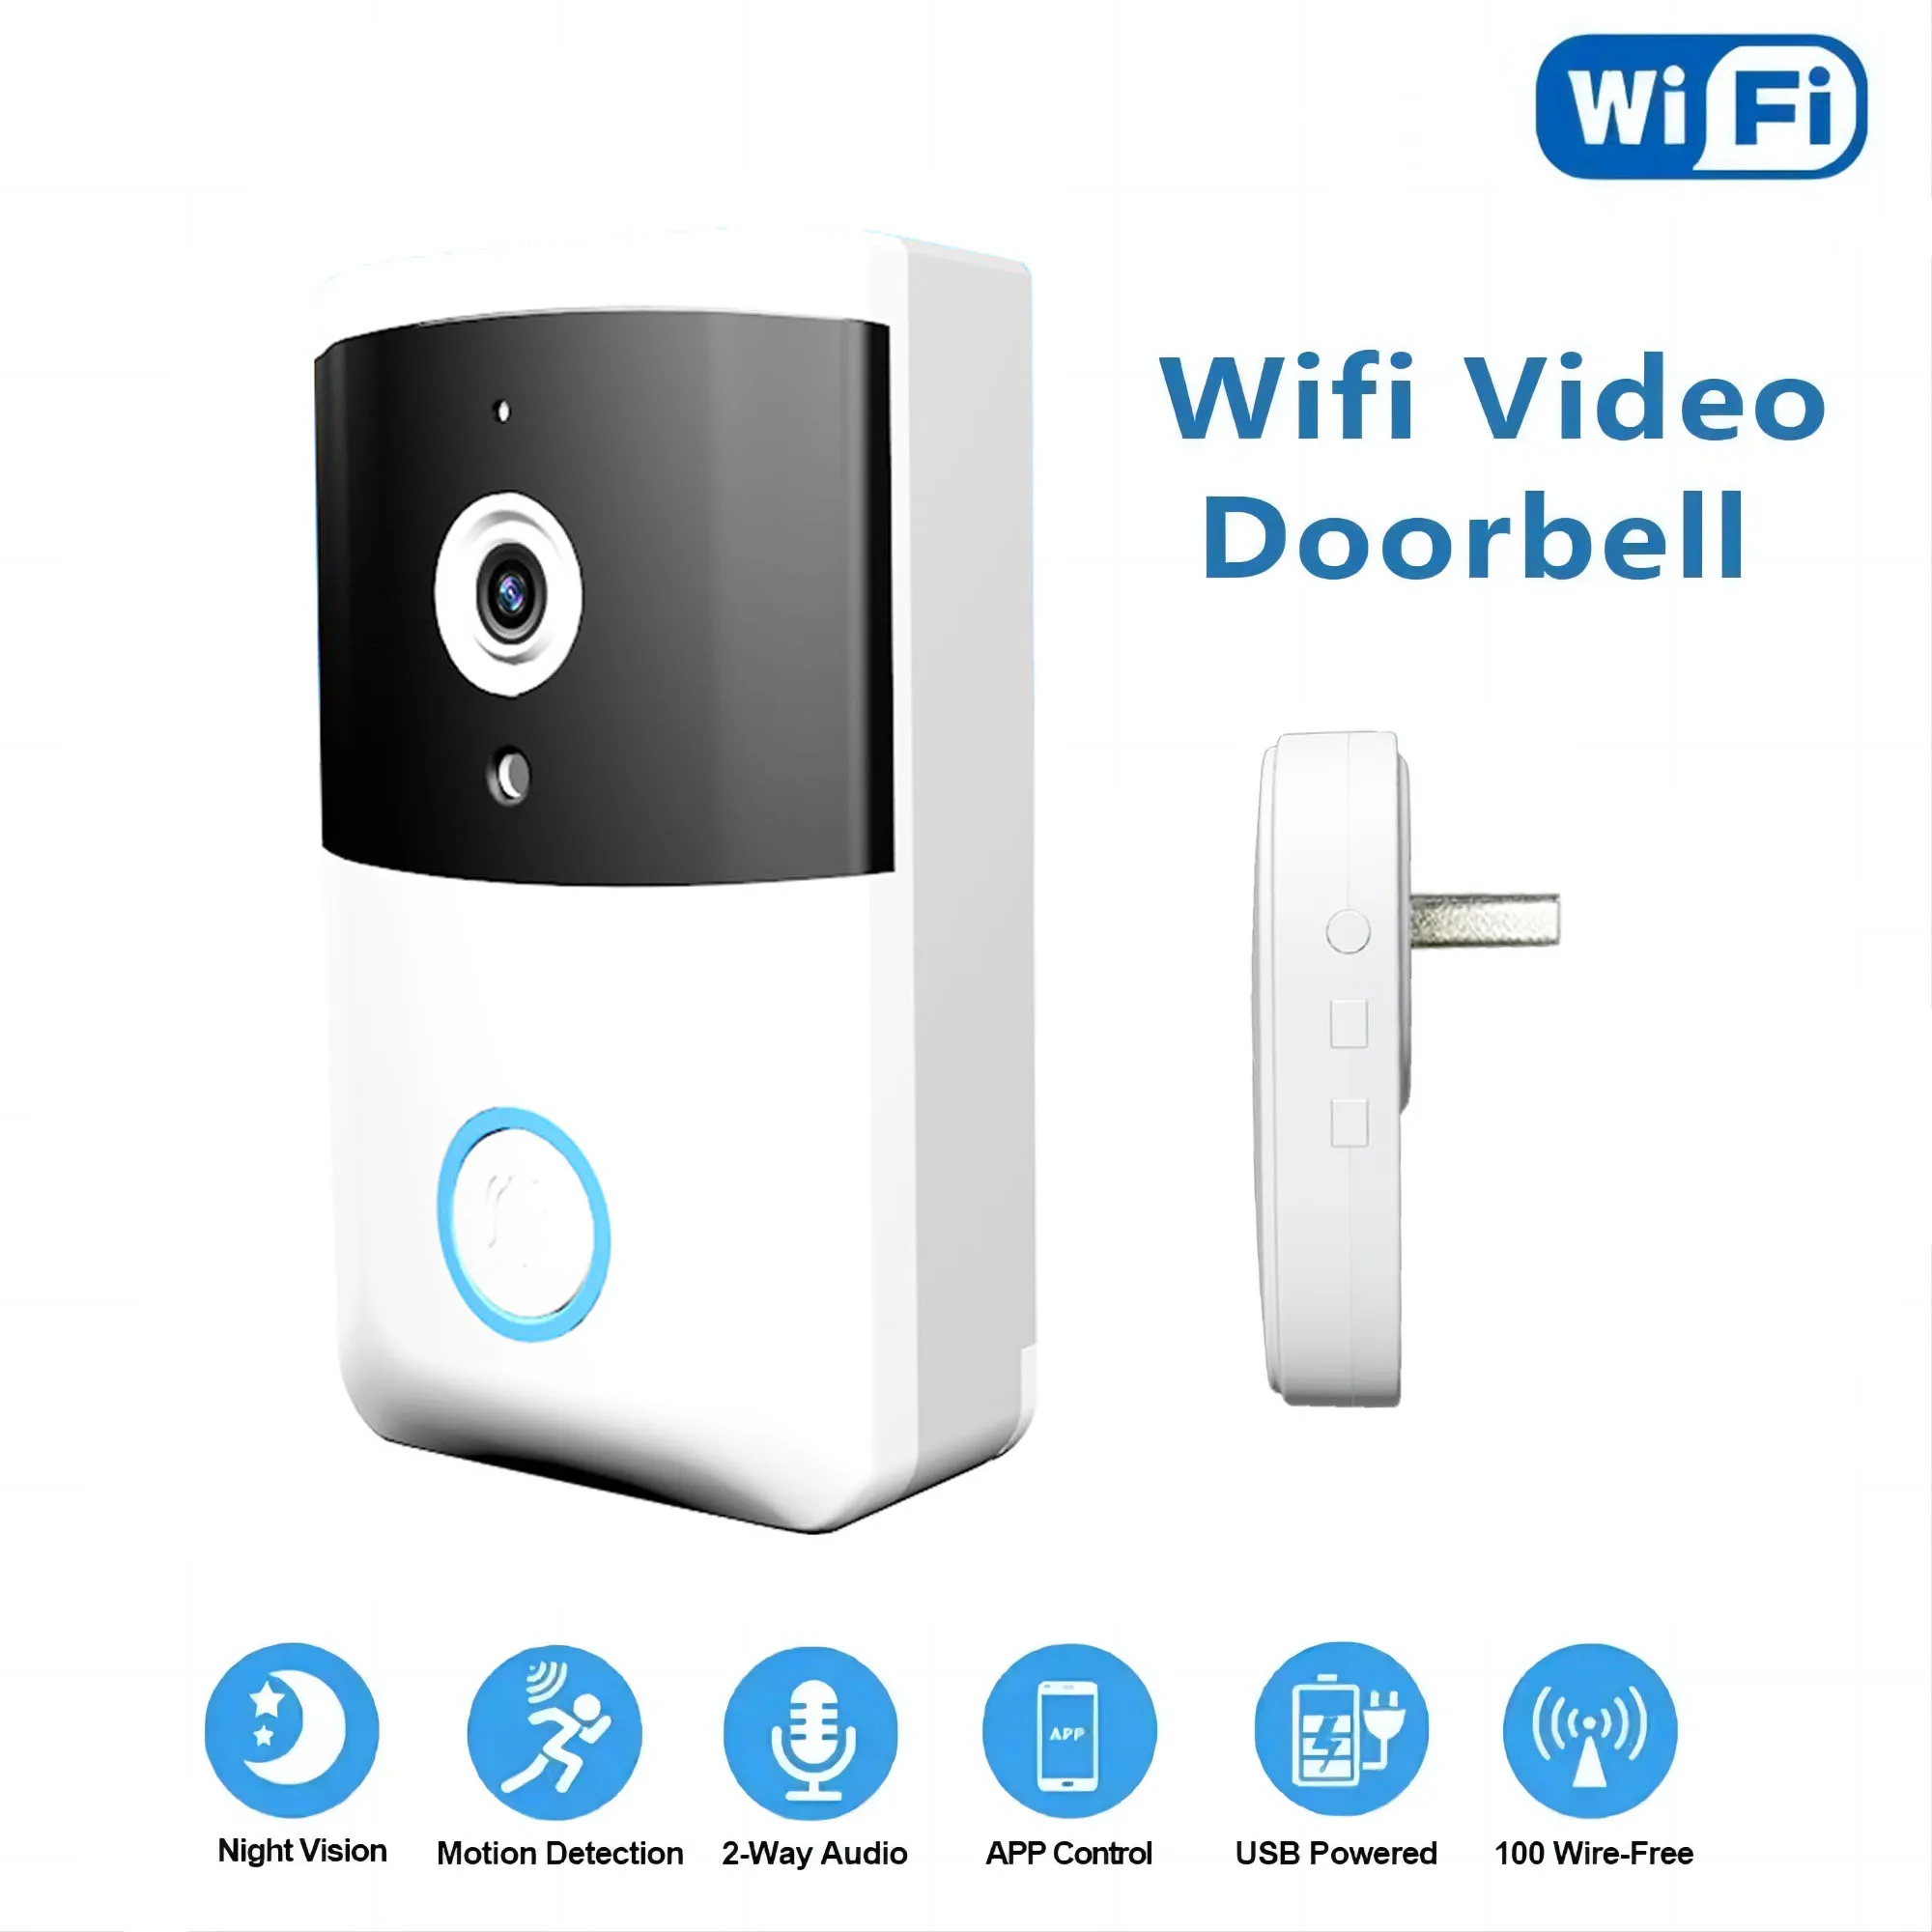 

Wireless Doorbell WiFi Video Door Bell Camera Smart Home Security Night Vision PIR Motion Detection Visual Intercom with Chime